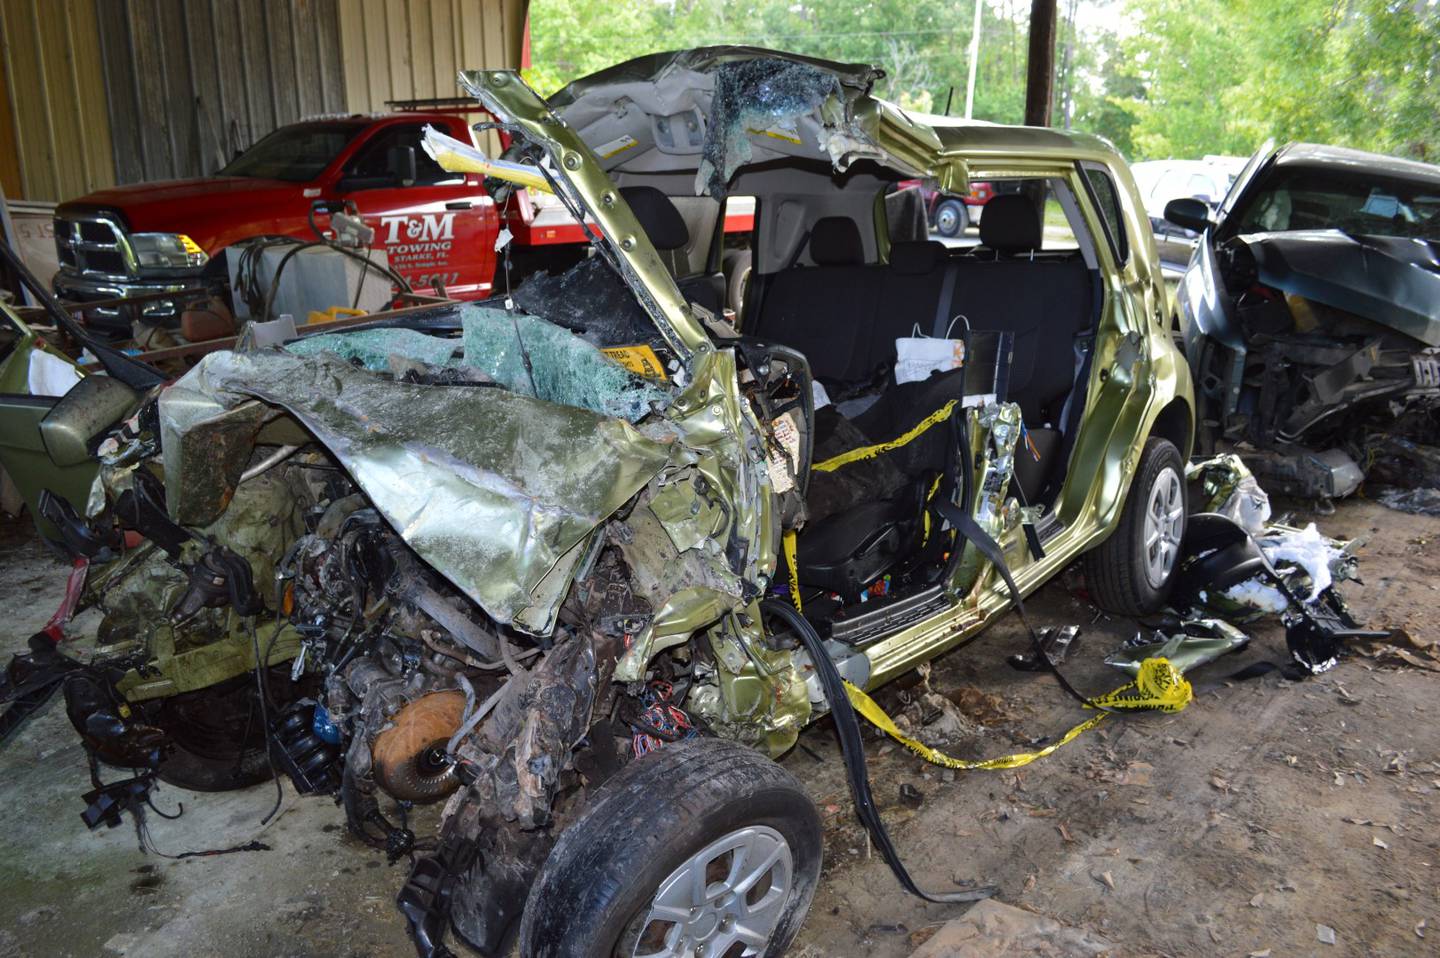 We obtained images of Sharon Johnson’s crippled vehicle taken after the collision with Union Correctional Institution employee Justin Stone, who was driving home from the prison at the time of the accident.